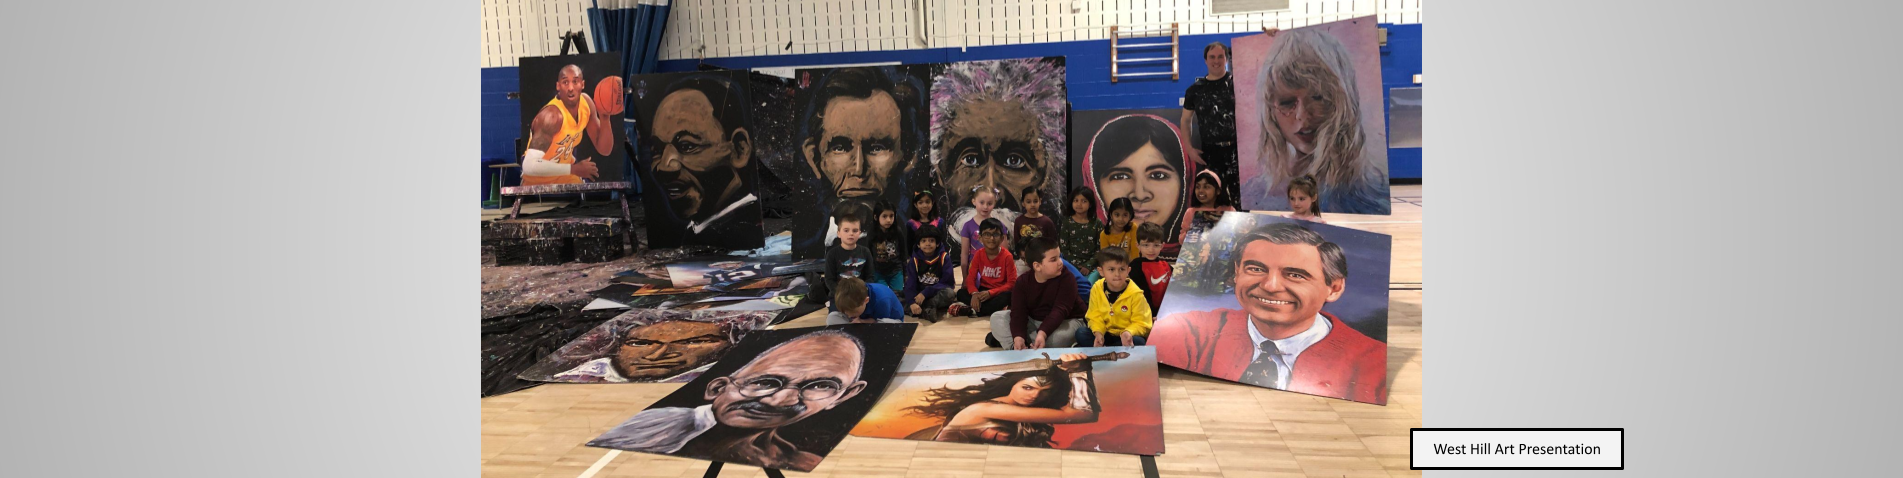 Inspirational artist shares artwork and message with kids